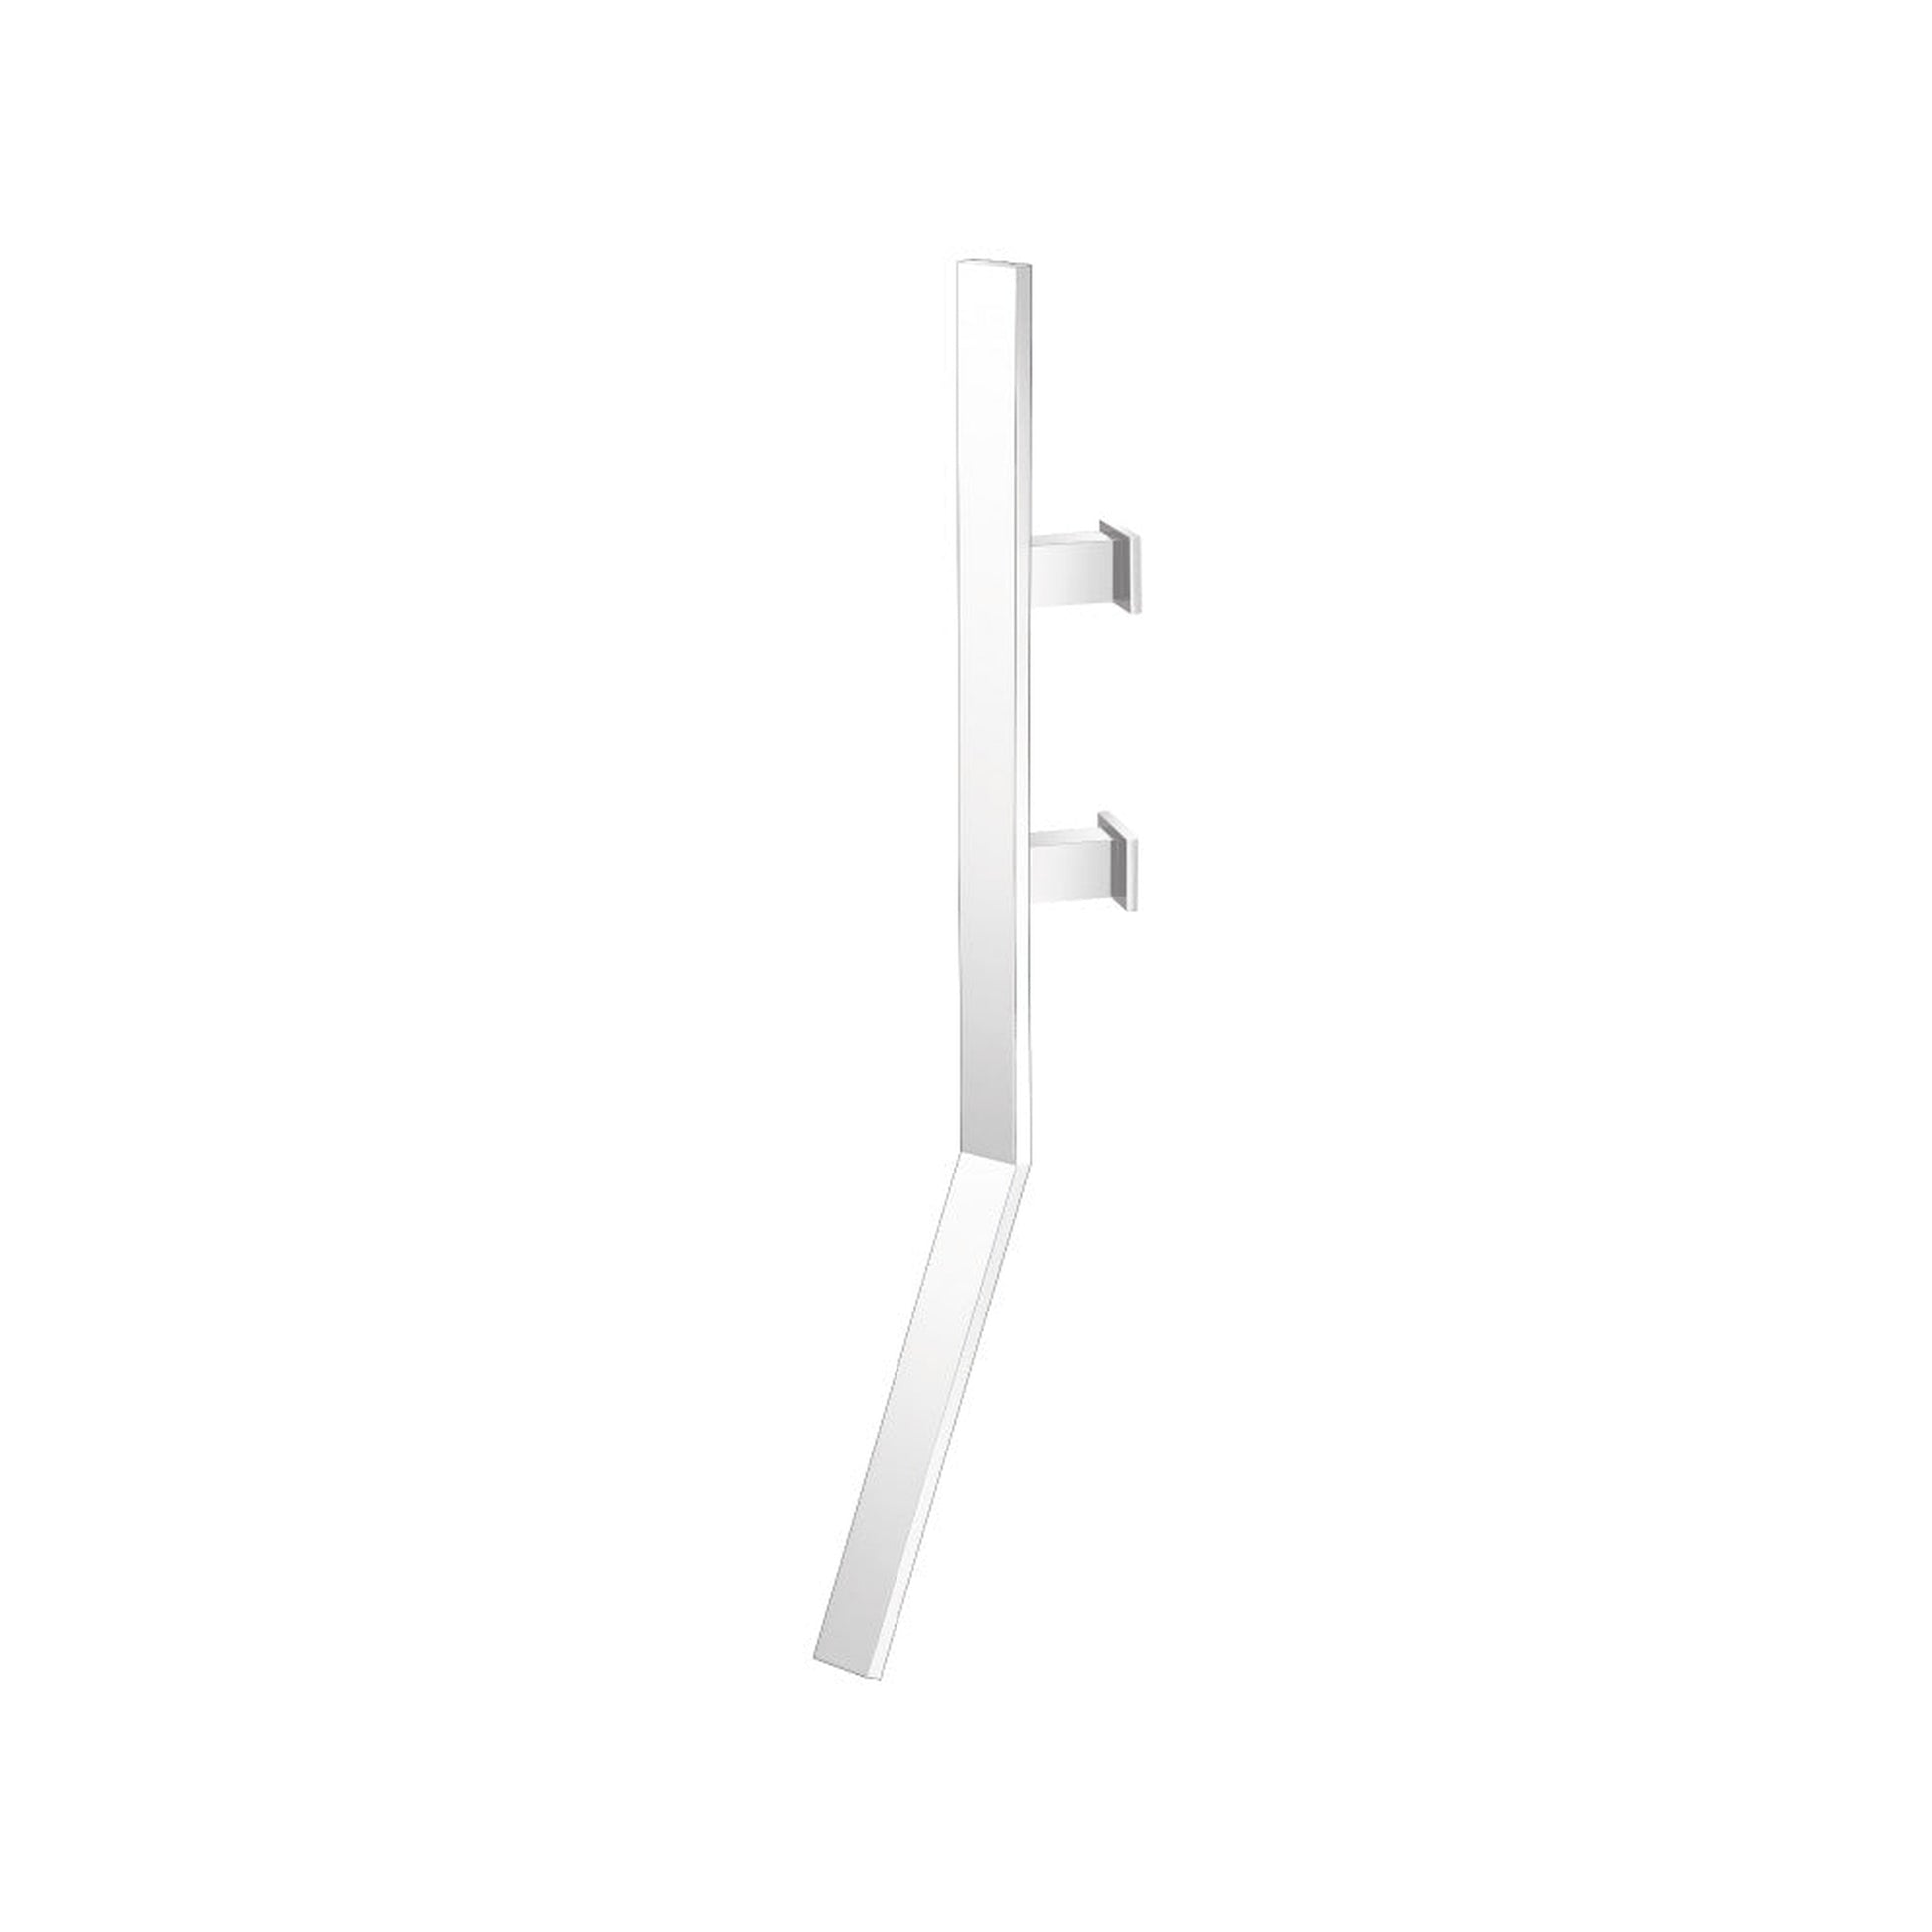 Isenberg Infinity Wall Mount Faucet Spout in Gloss White